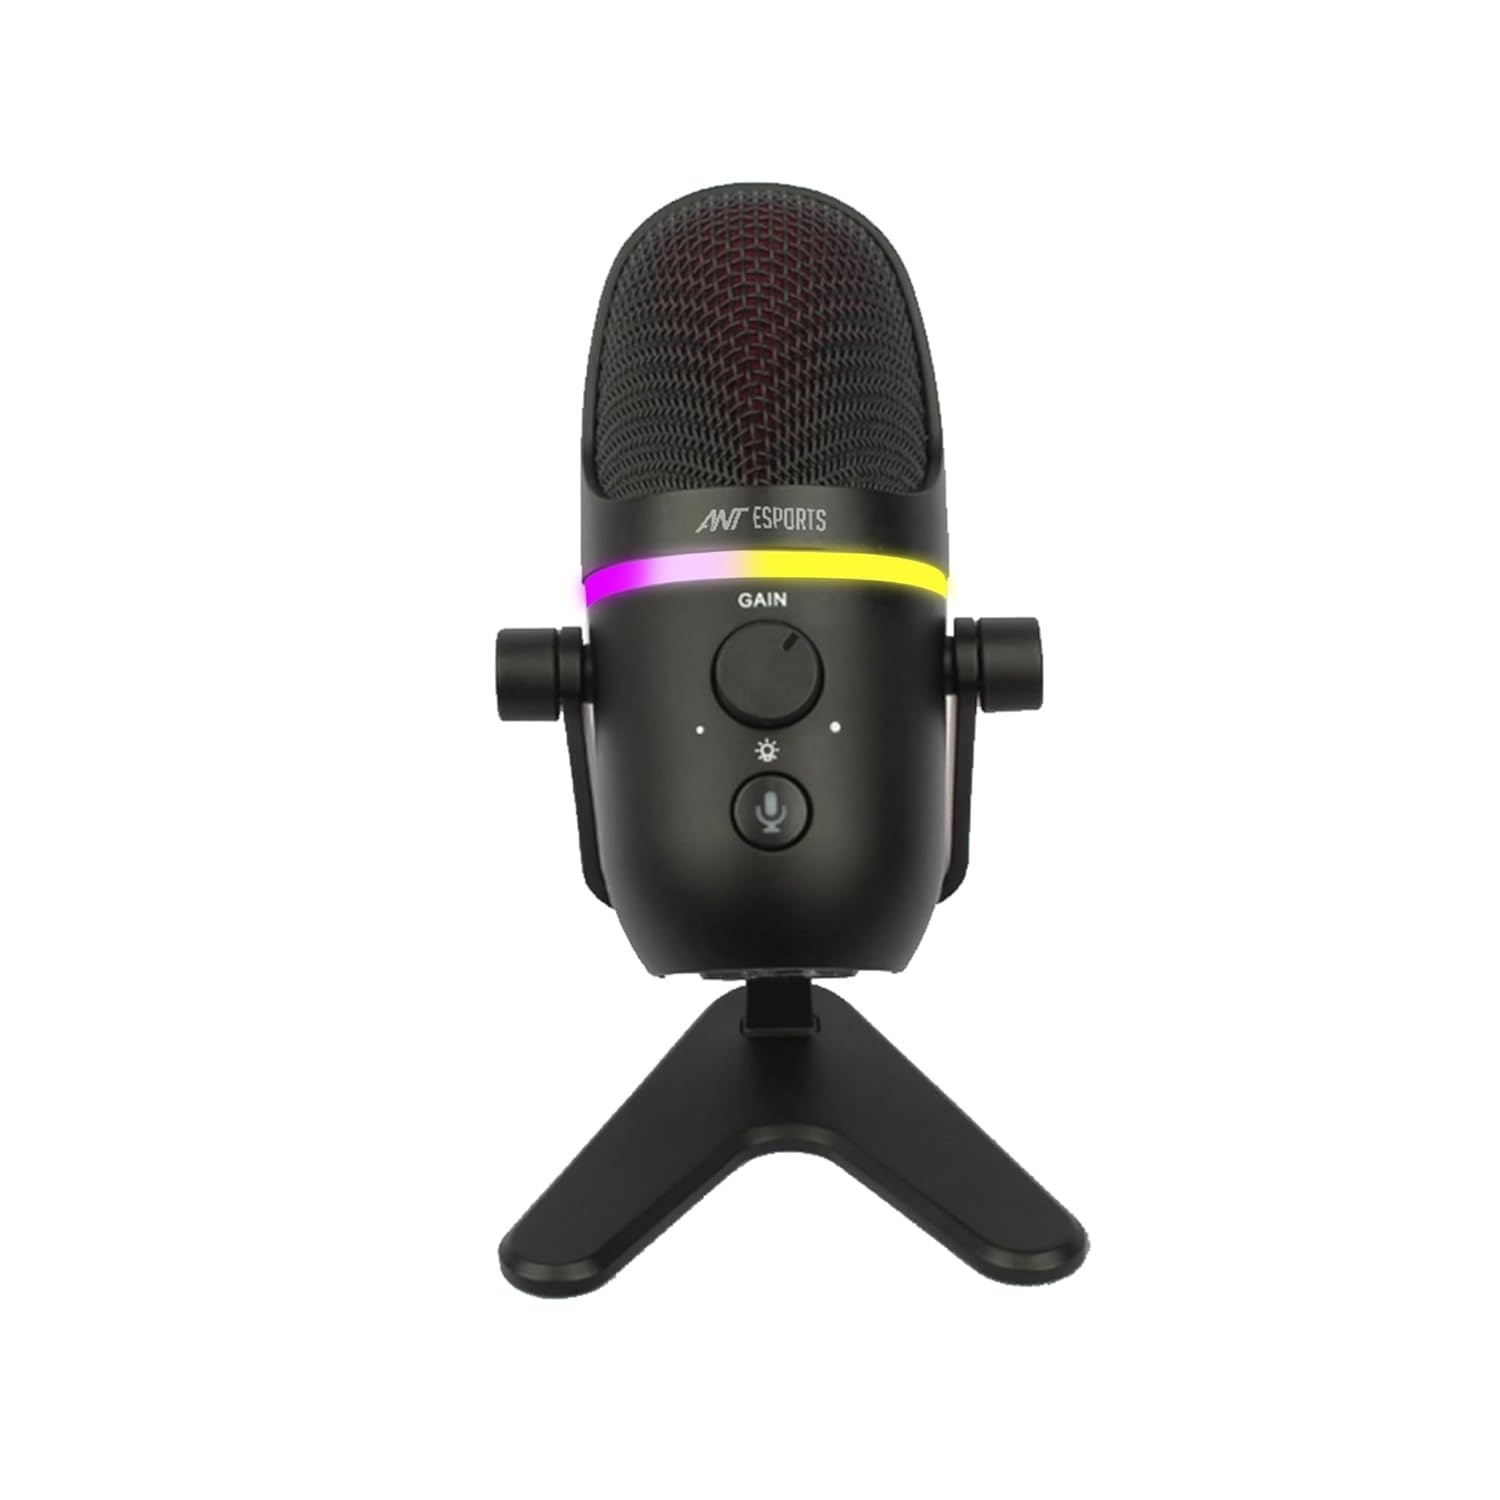 Ant Esports Wente 250 USB Microphone, Plug and Play Gaming Mic for PC, Mac, PS4/5, Podcast Microphone with RGB, Mute, Monitor, Noise Reduction, Volume Gain, Great for Recording, Streaming